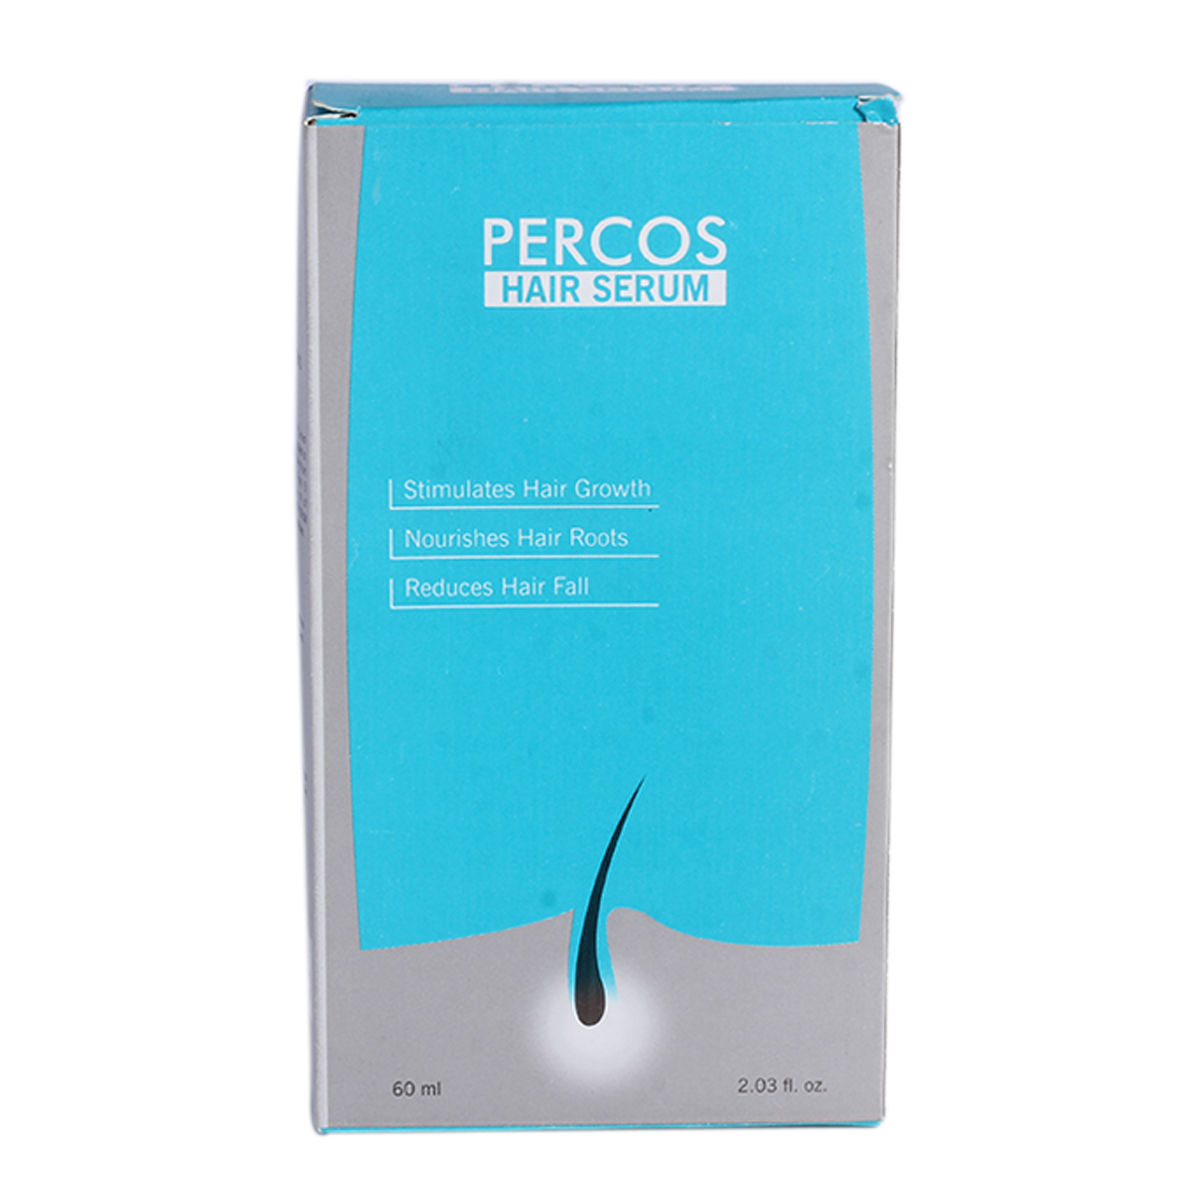 Percos Hair Serum, 60 ml Price, Uses, Side Effects, Composition - Apollo  Pharmacy